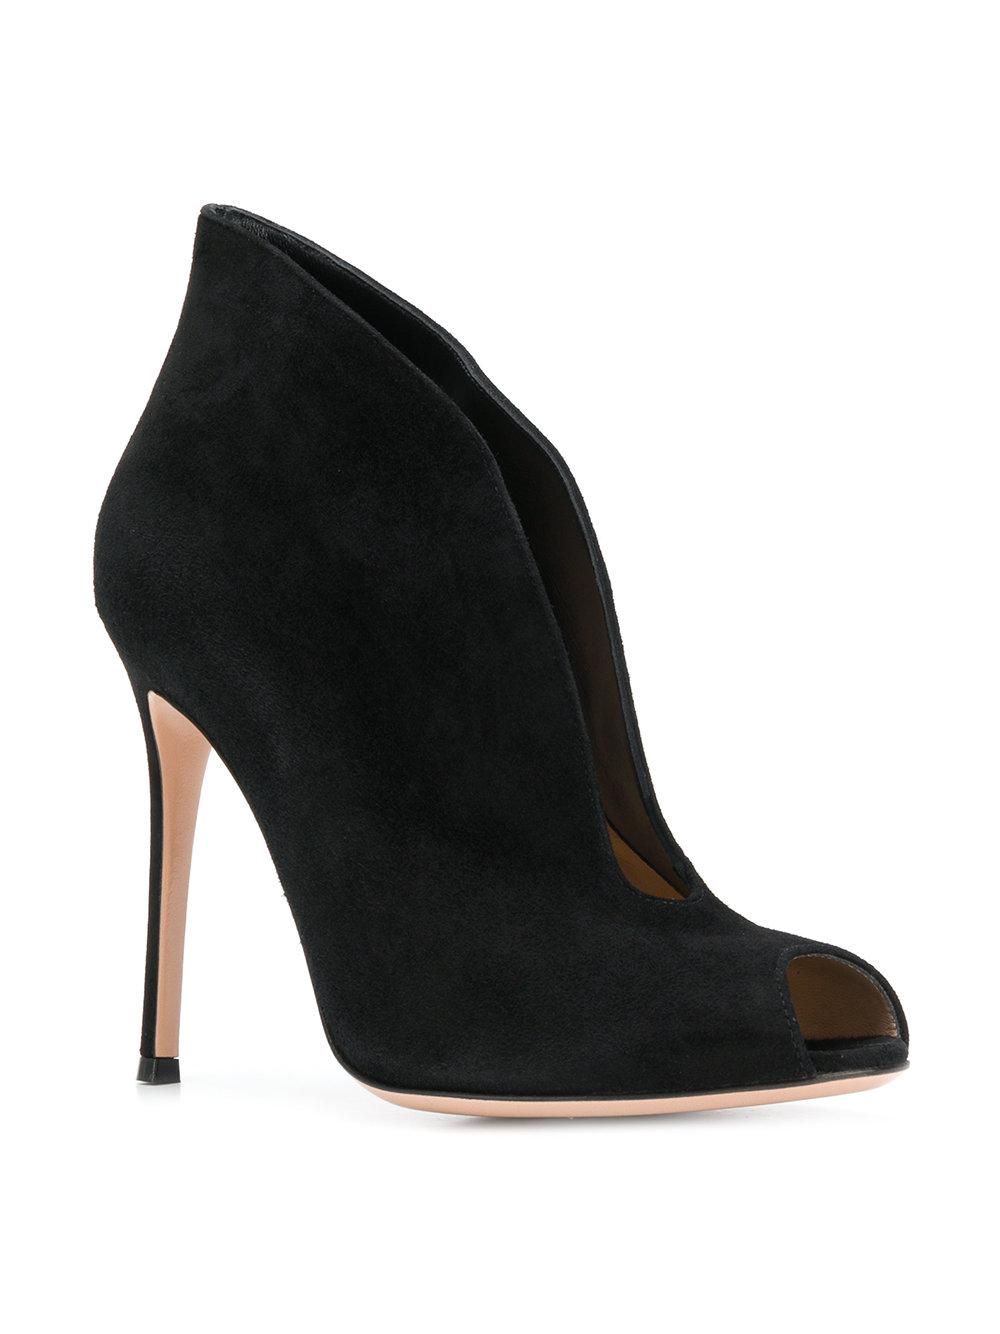 Gianvito Rossi Suede Vamp Boots in Black - Lyst